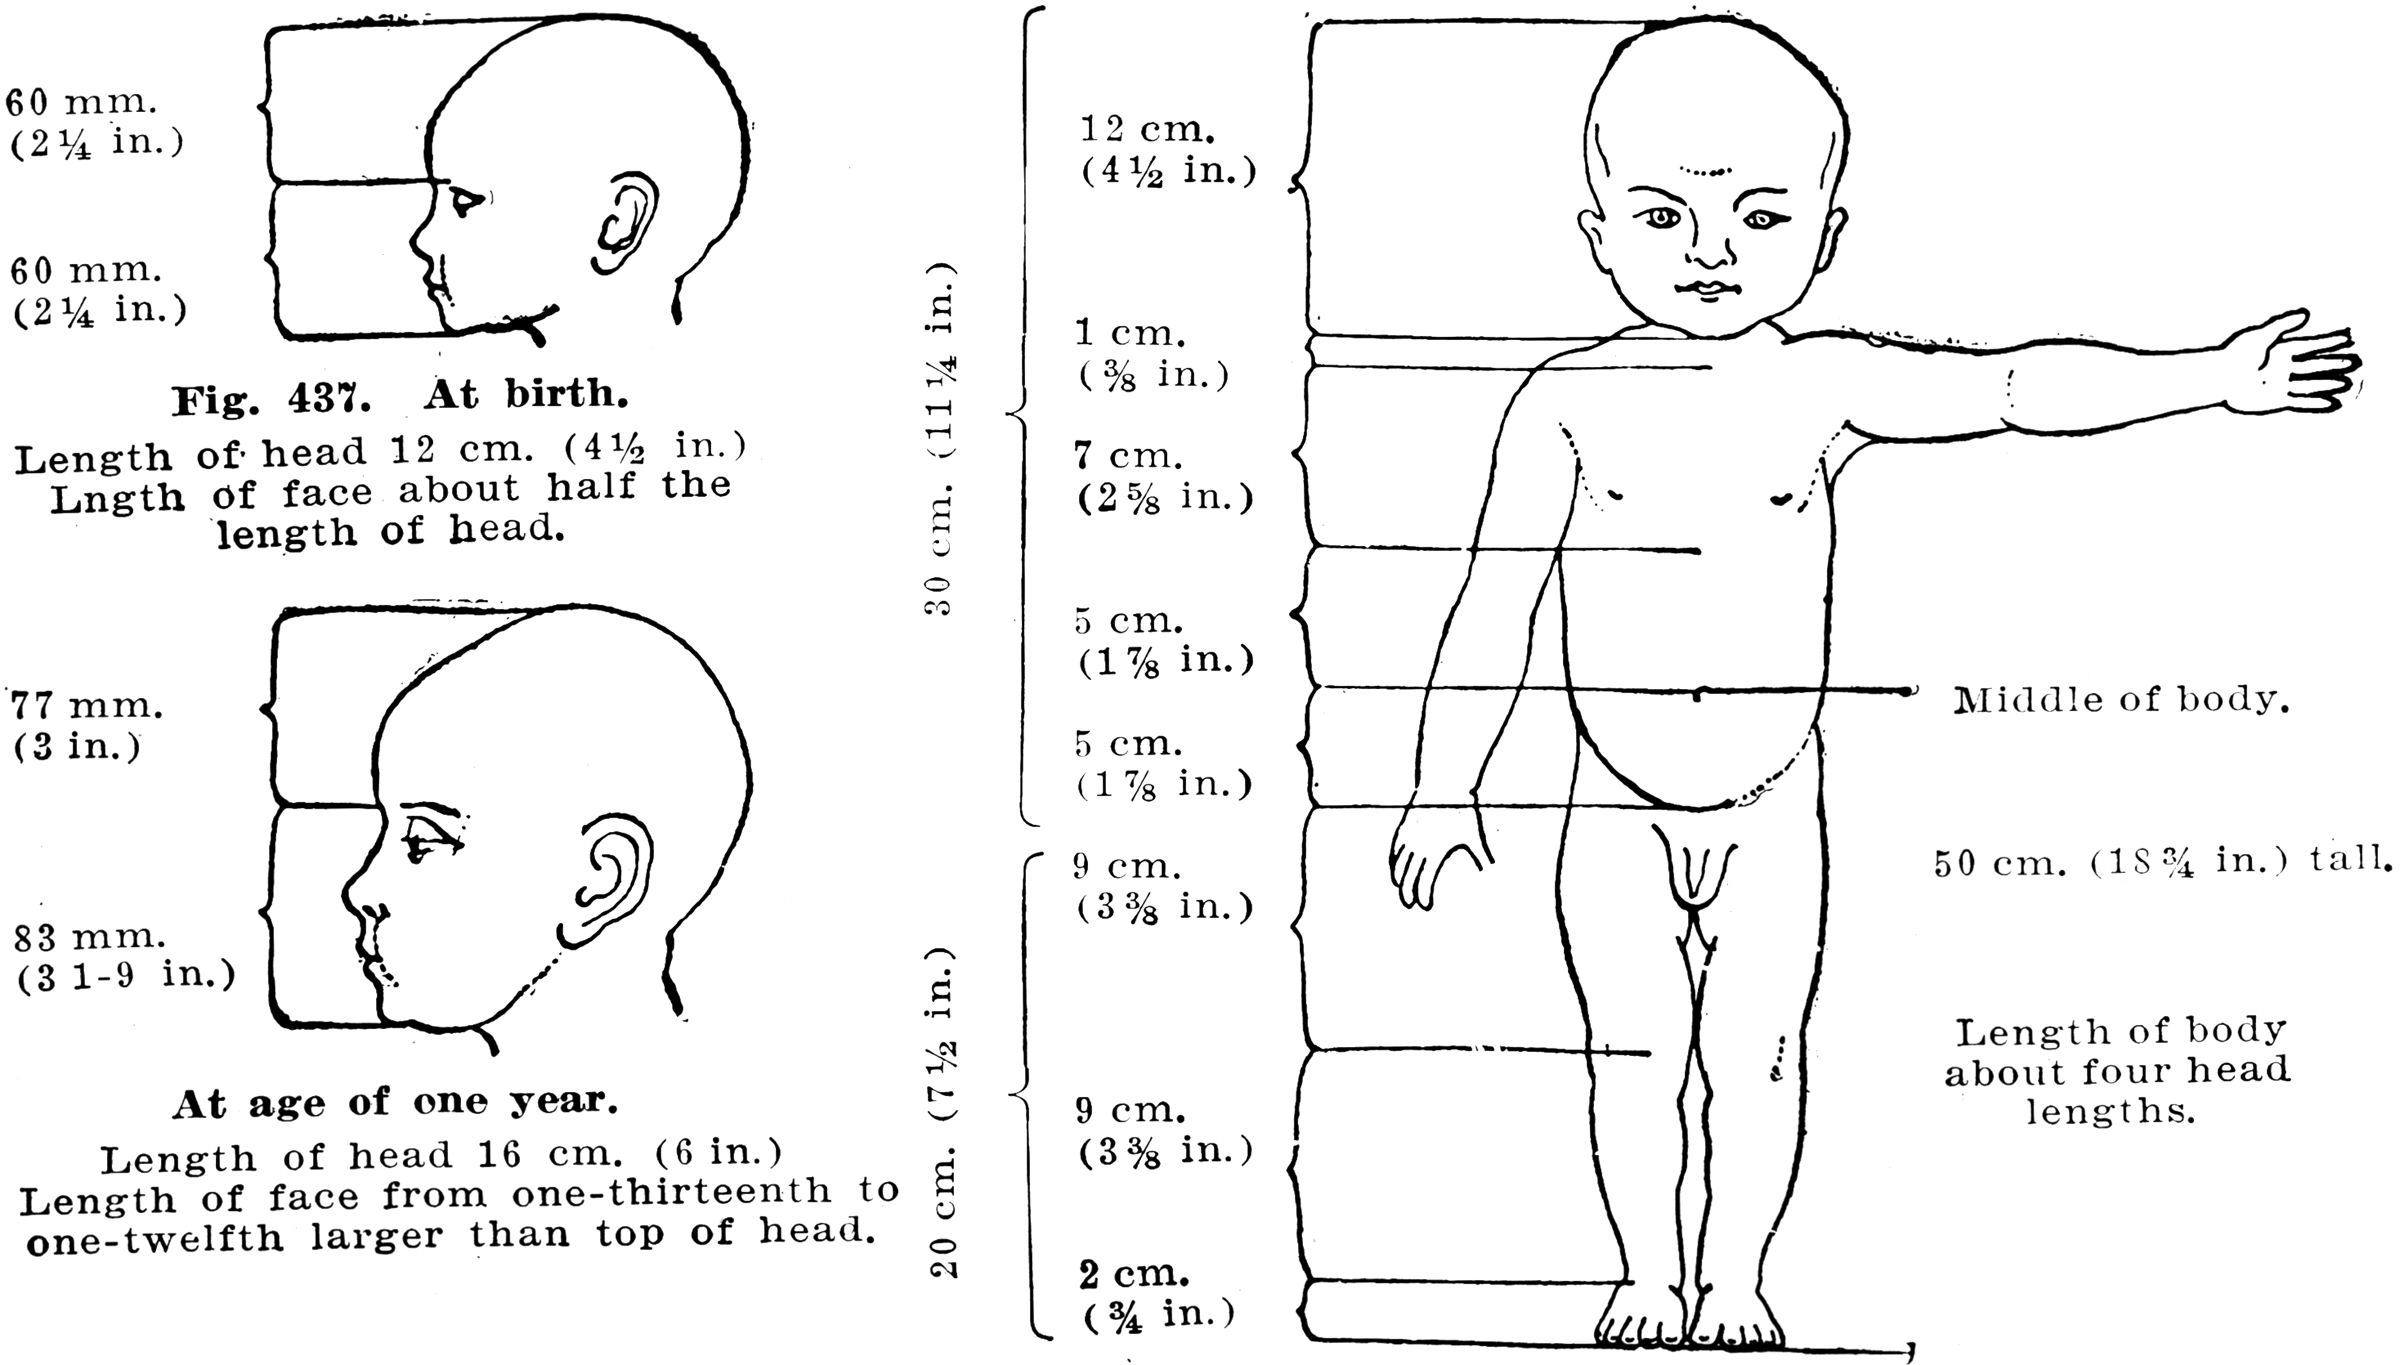 Proportions of a Healthy Child's Body at Birth and Birth and One Year